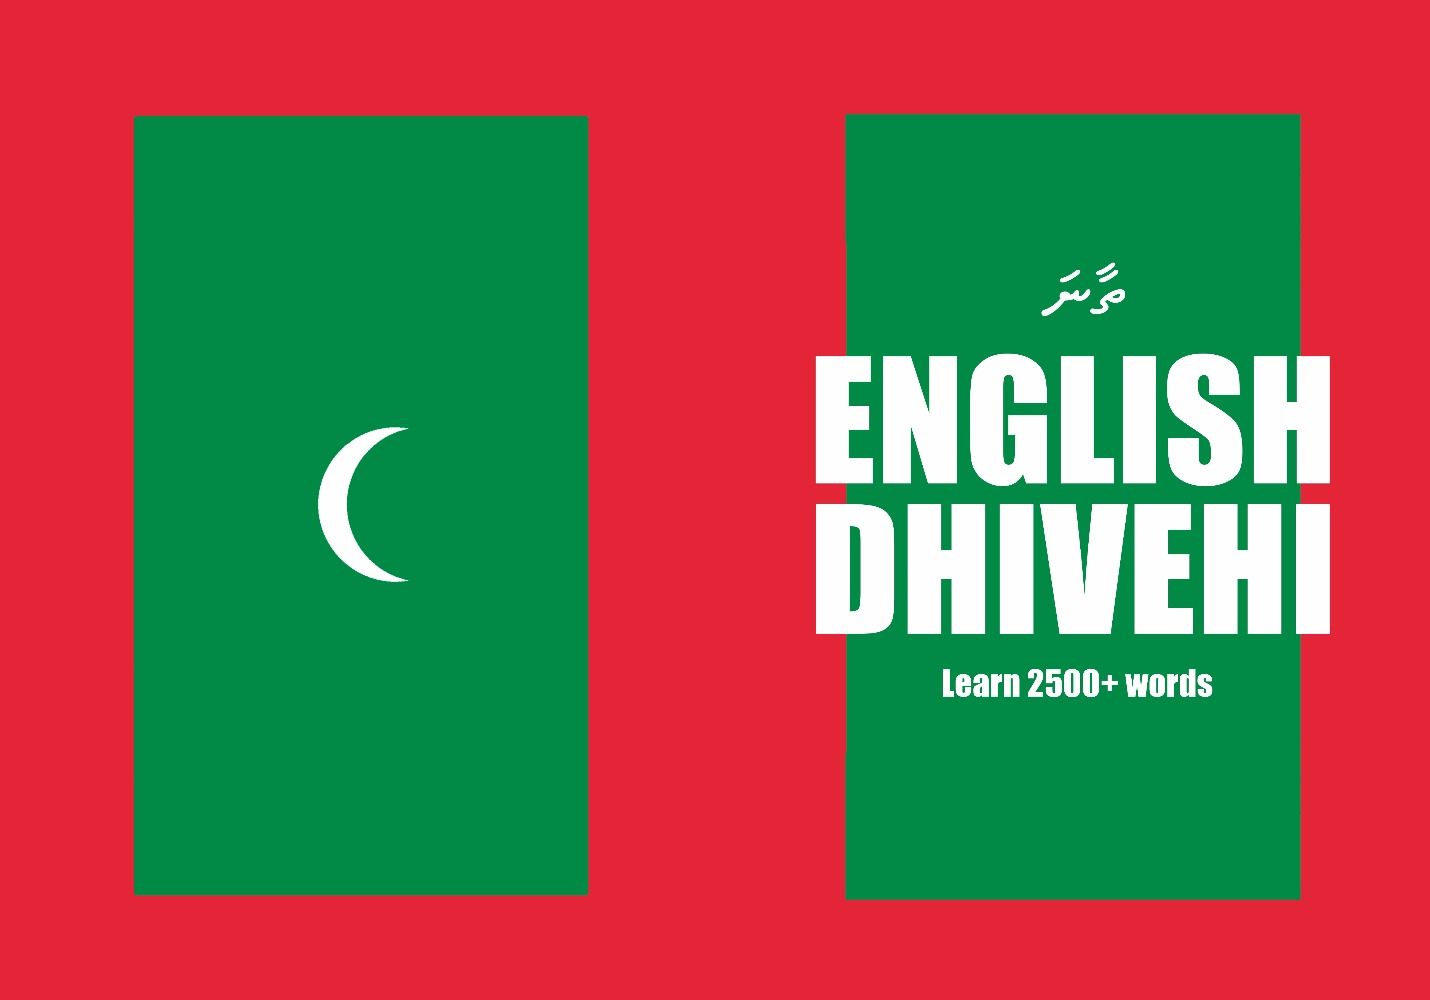 Dhivehi language learning notebook cover